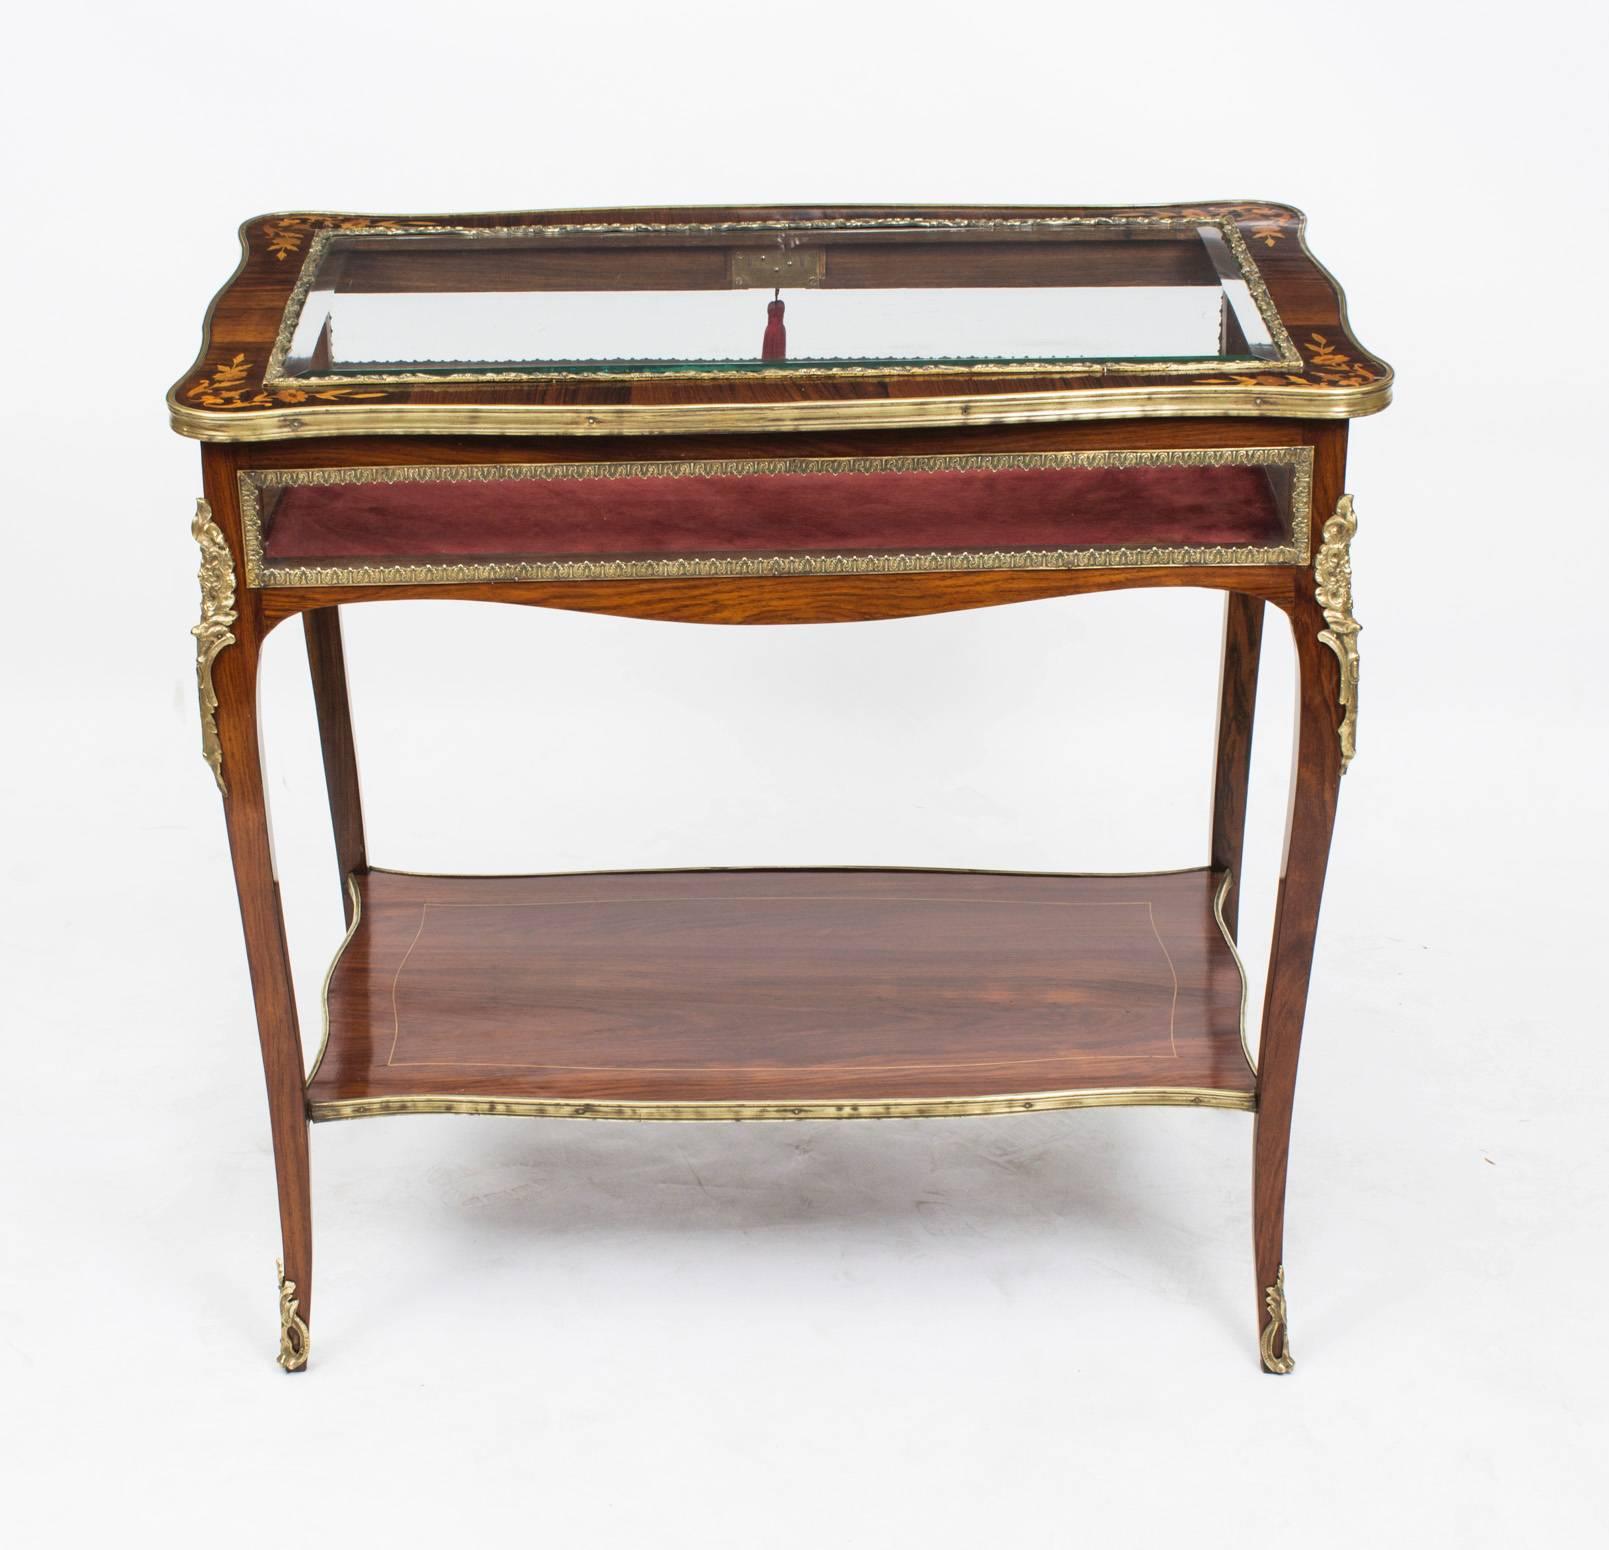 Late 19th Century Antique Rosewood and Marquetry Bijouterie Display Table